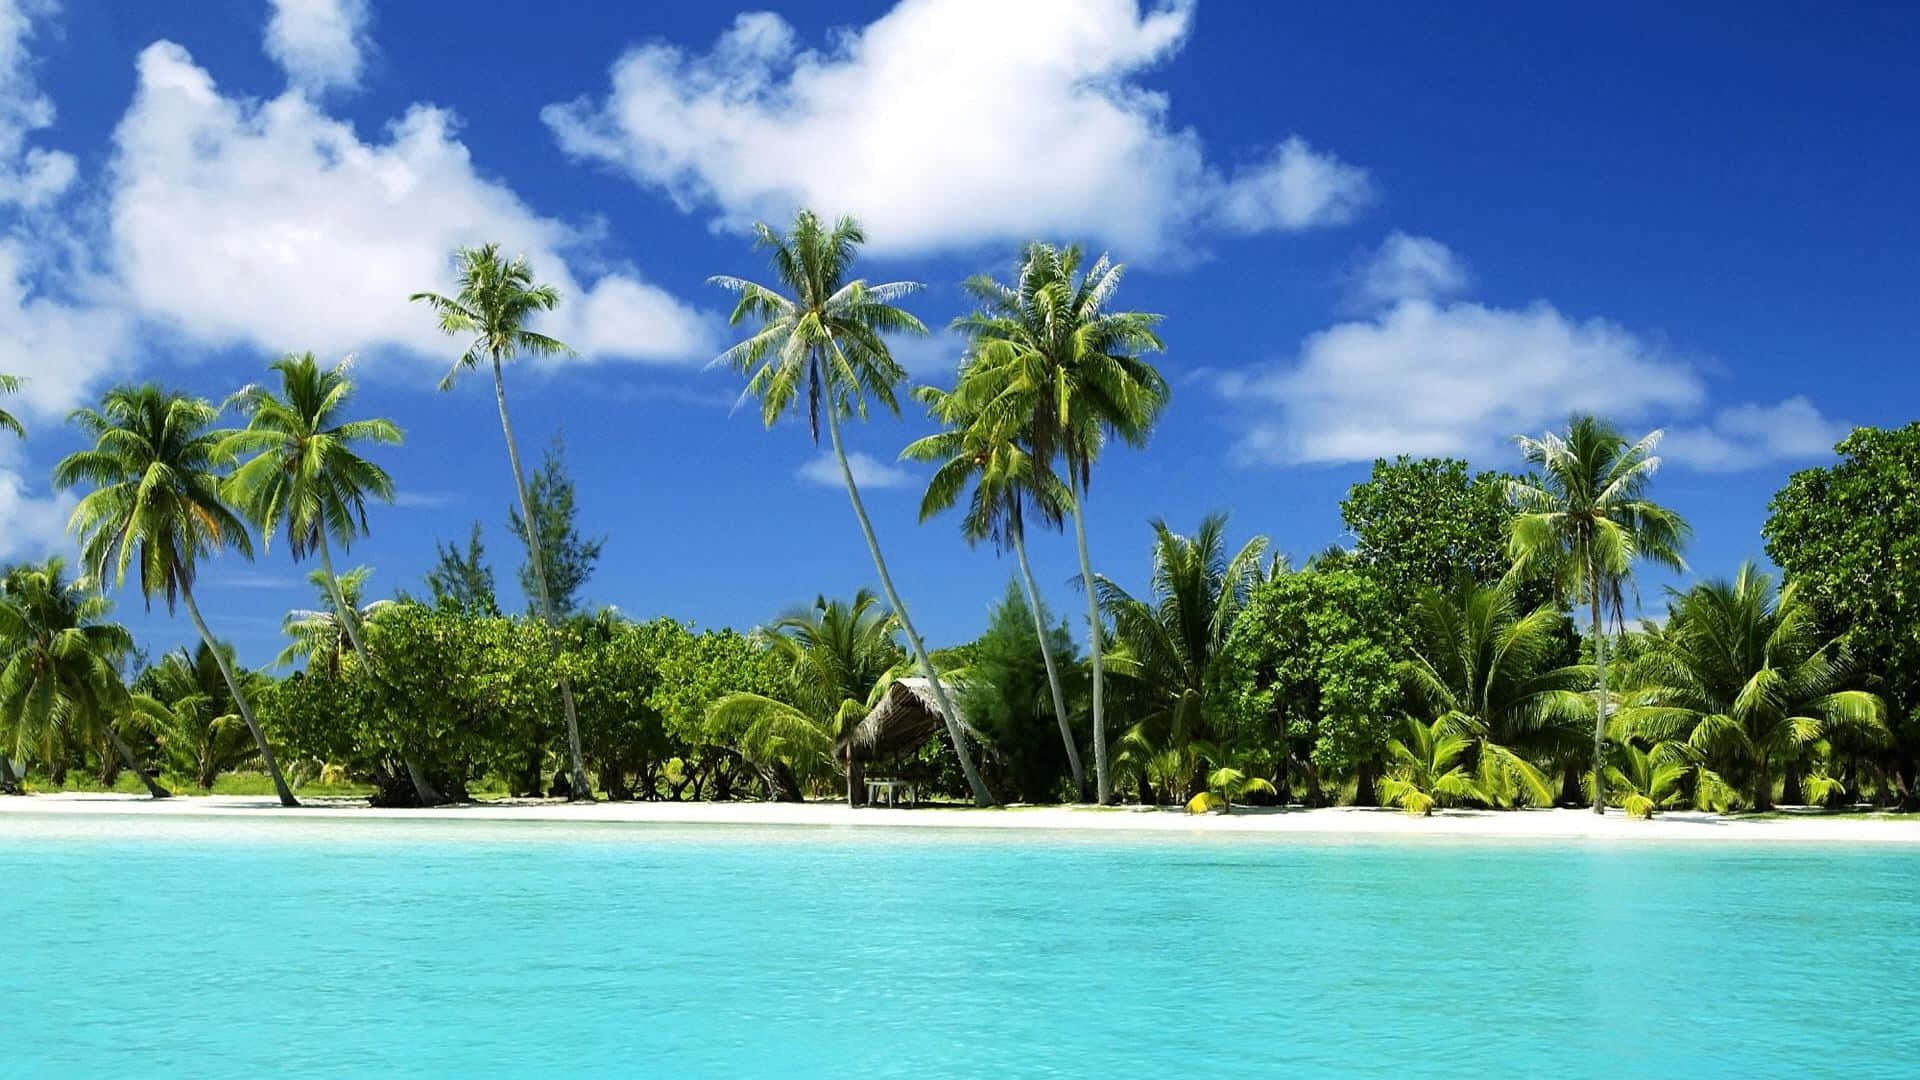 Enjoy a moment of bliss with a vacation to a cute tropical paradise. Wallpaper